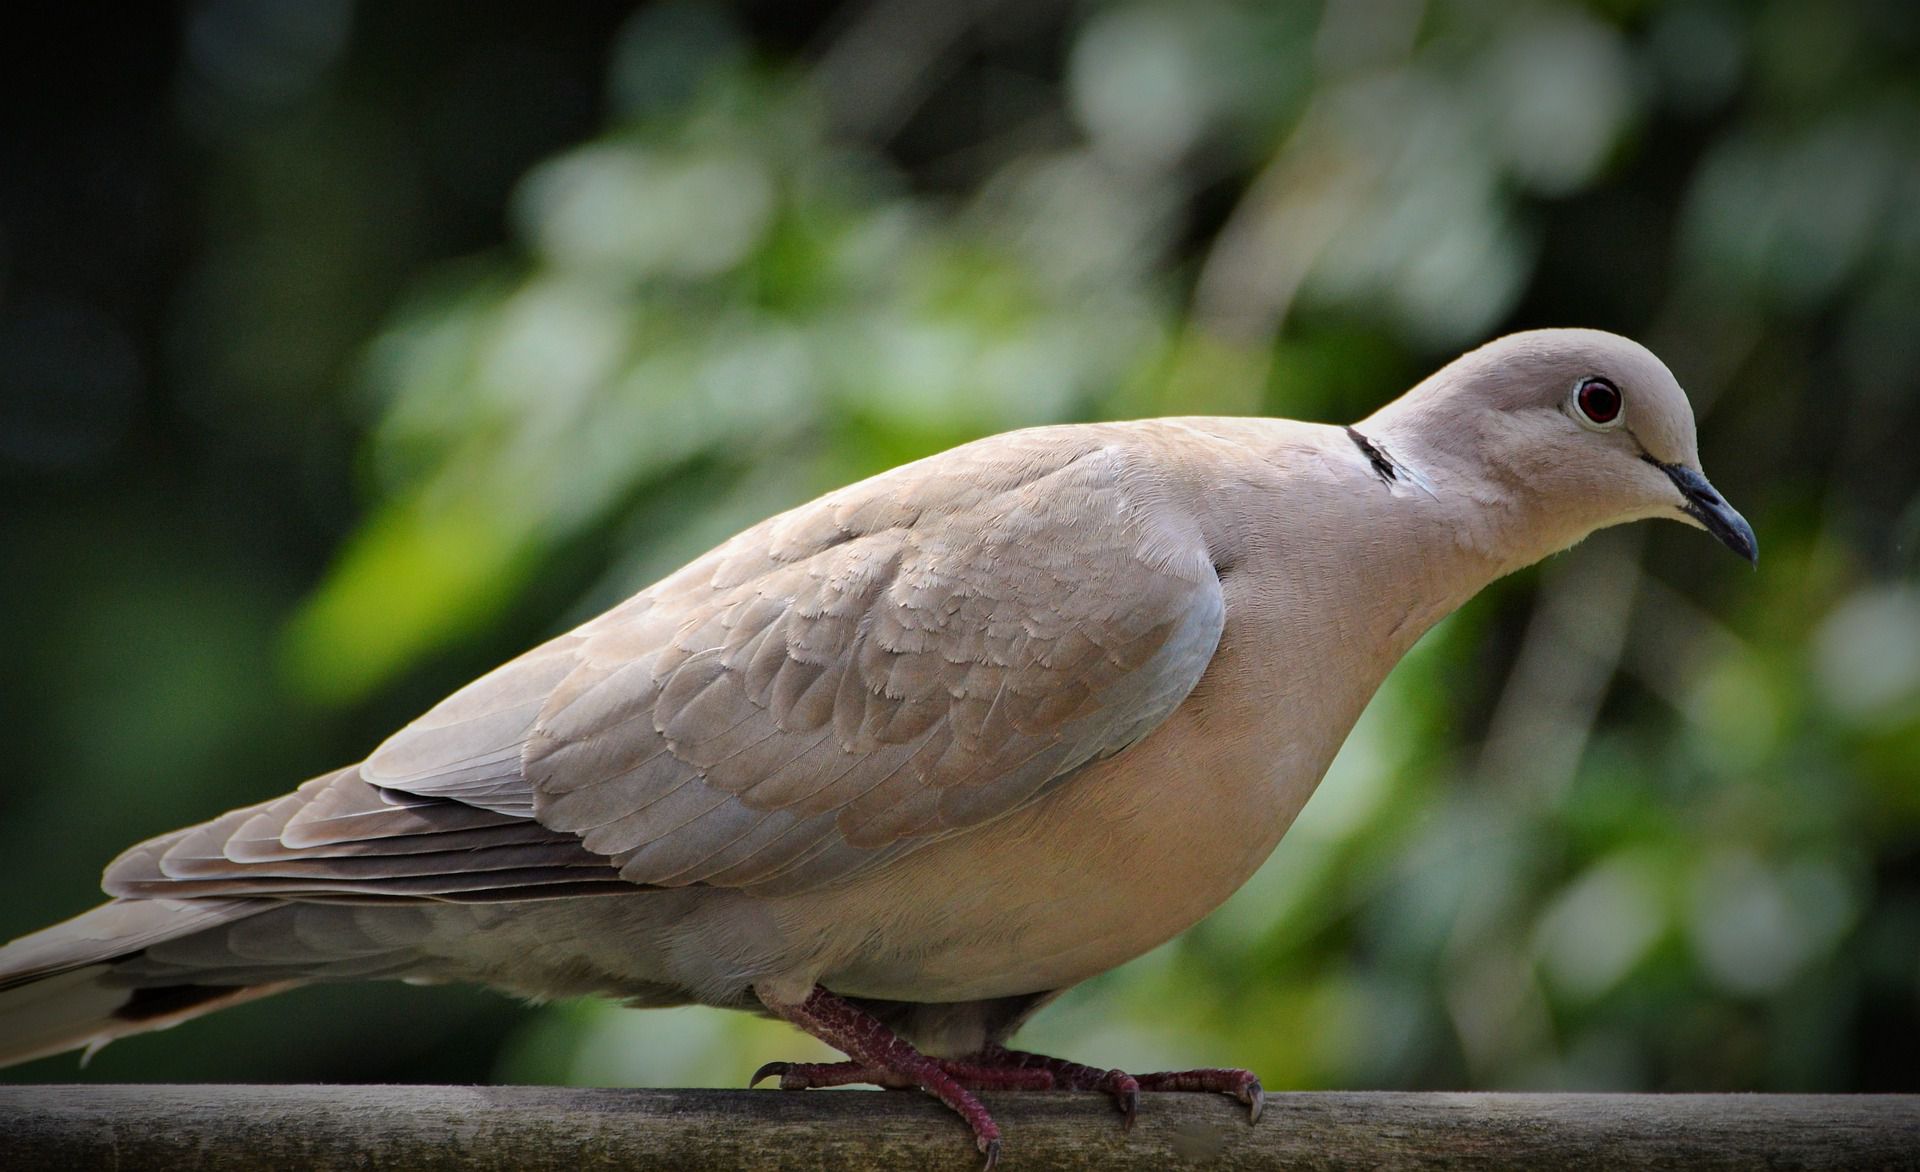 Dove and Pigeon Identification Tips